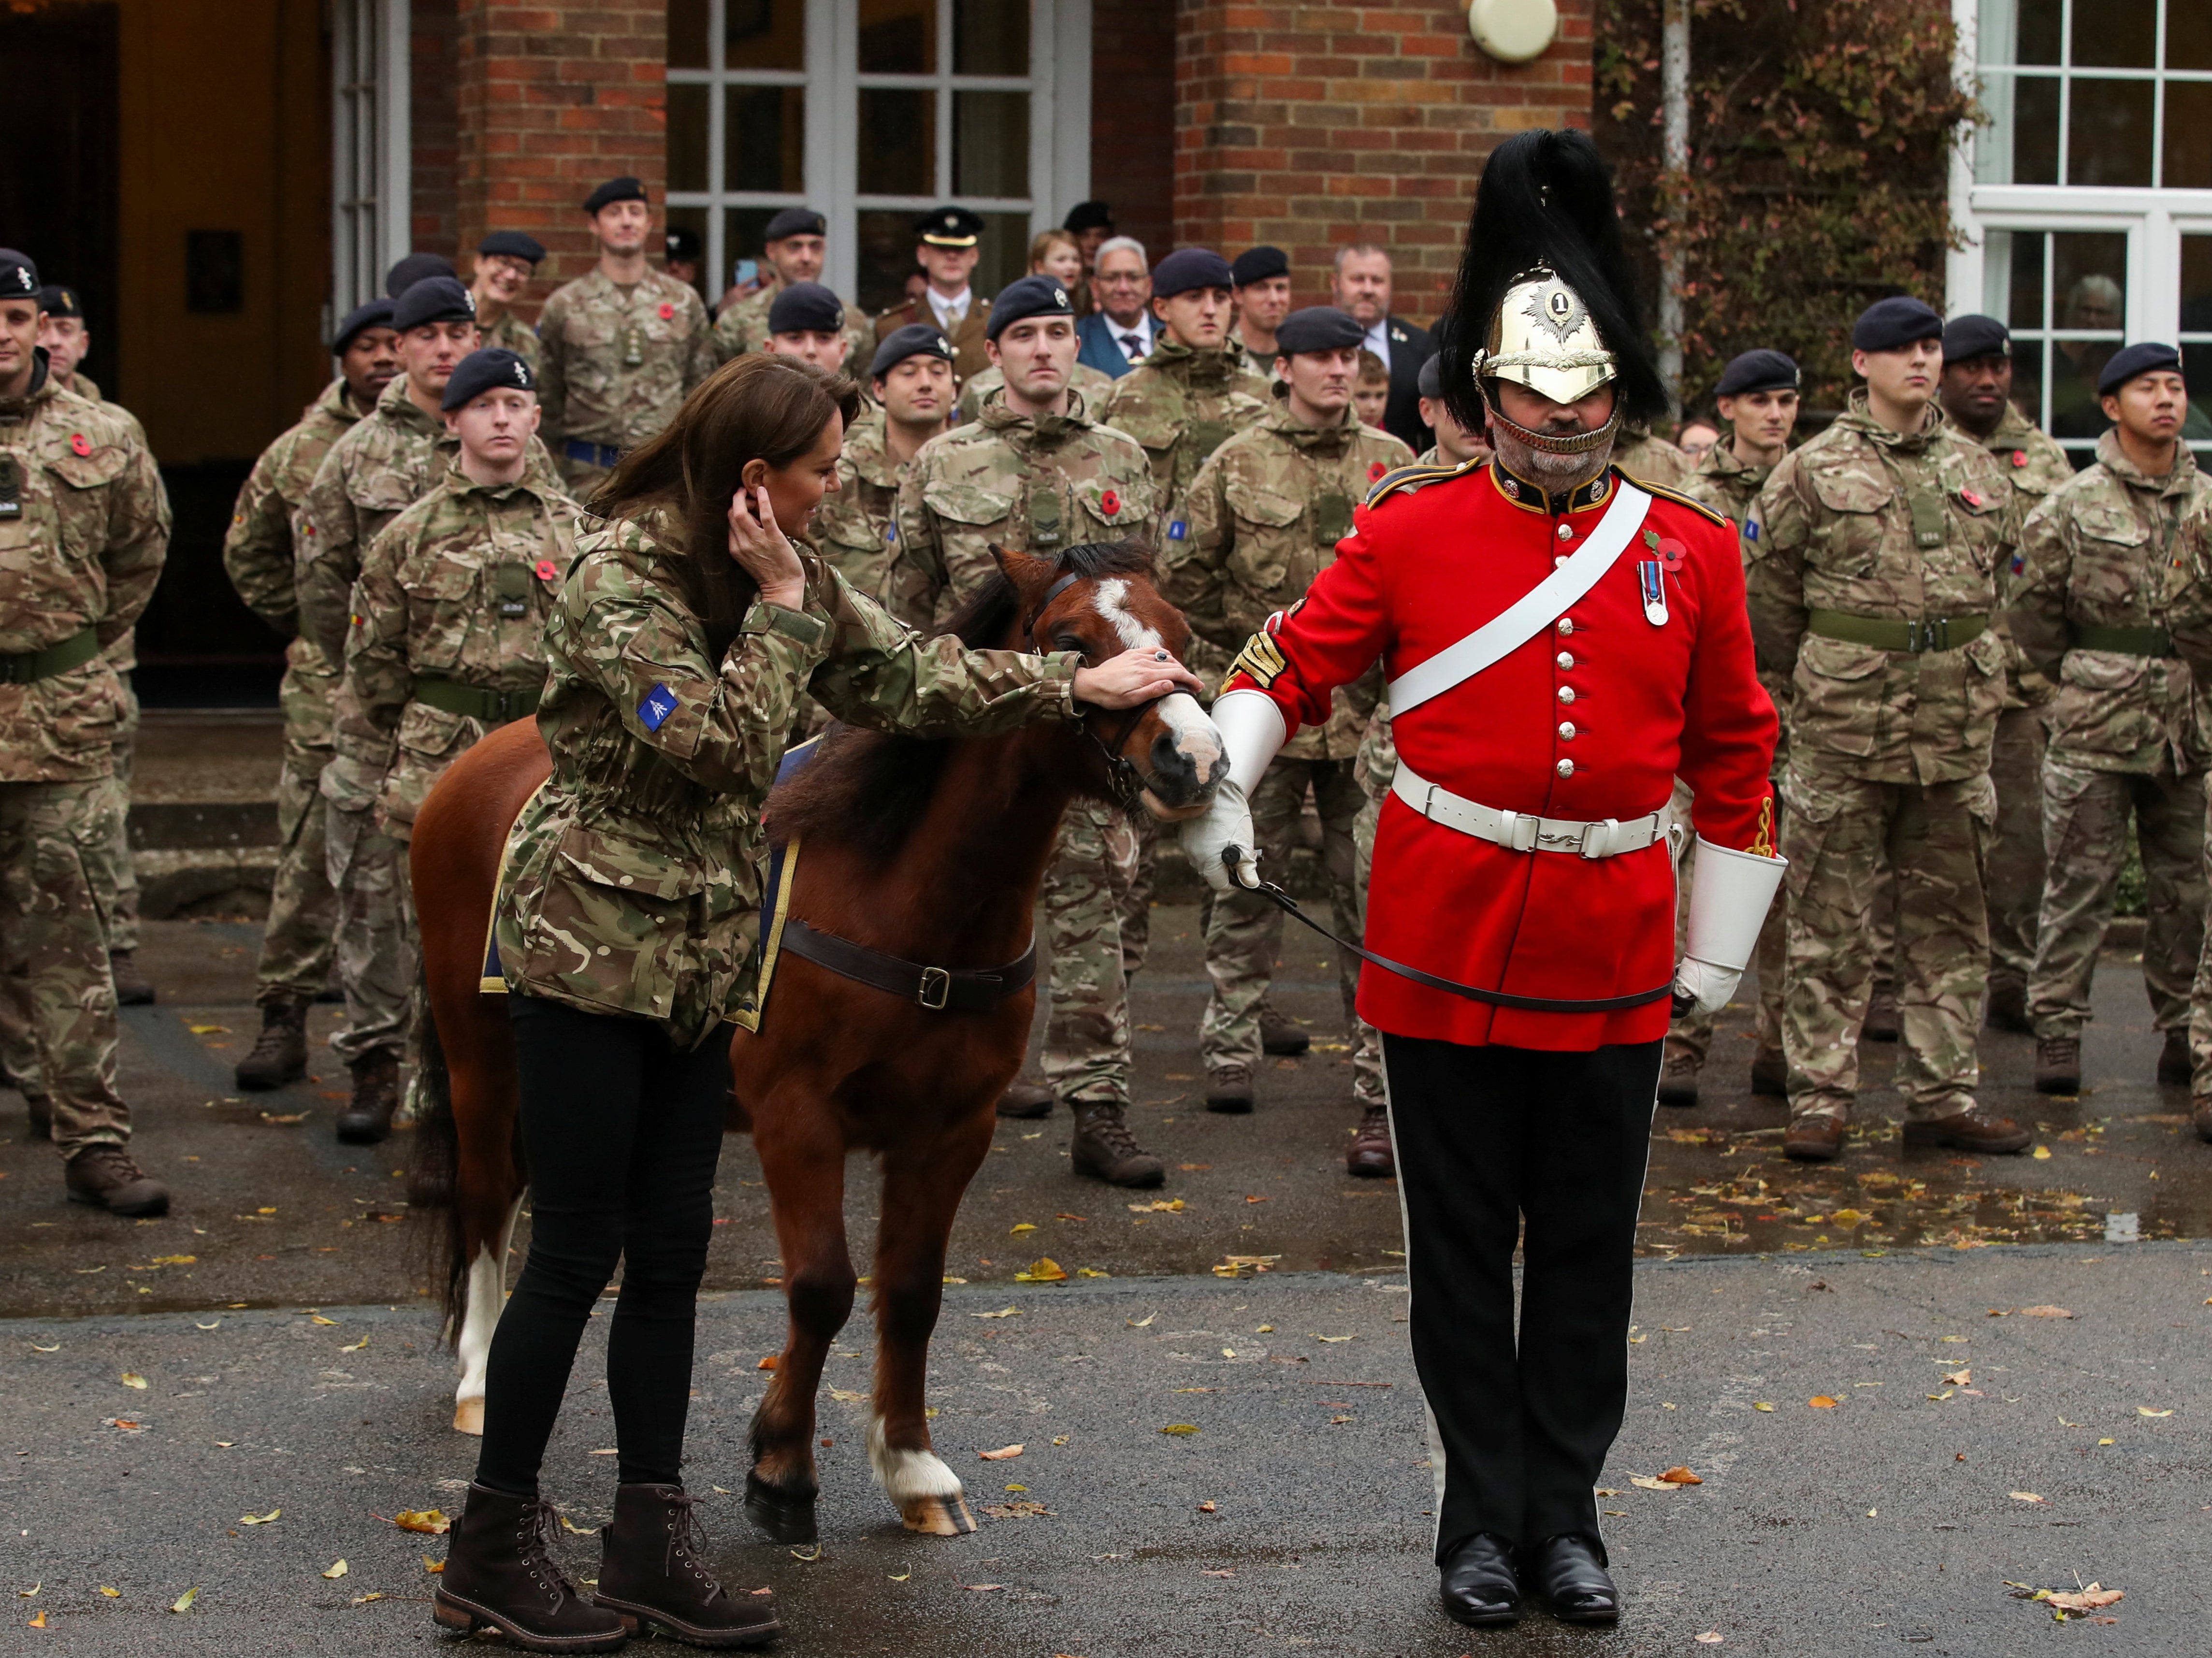 Princess of Wales touches a pony as she visits The Queen's Dragoon Guards Regiment for the first time